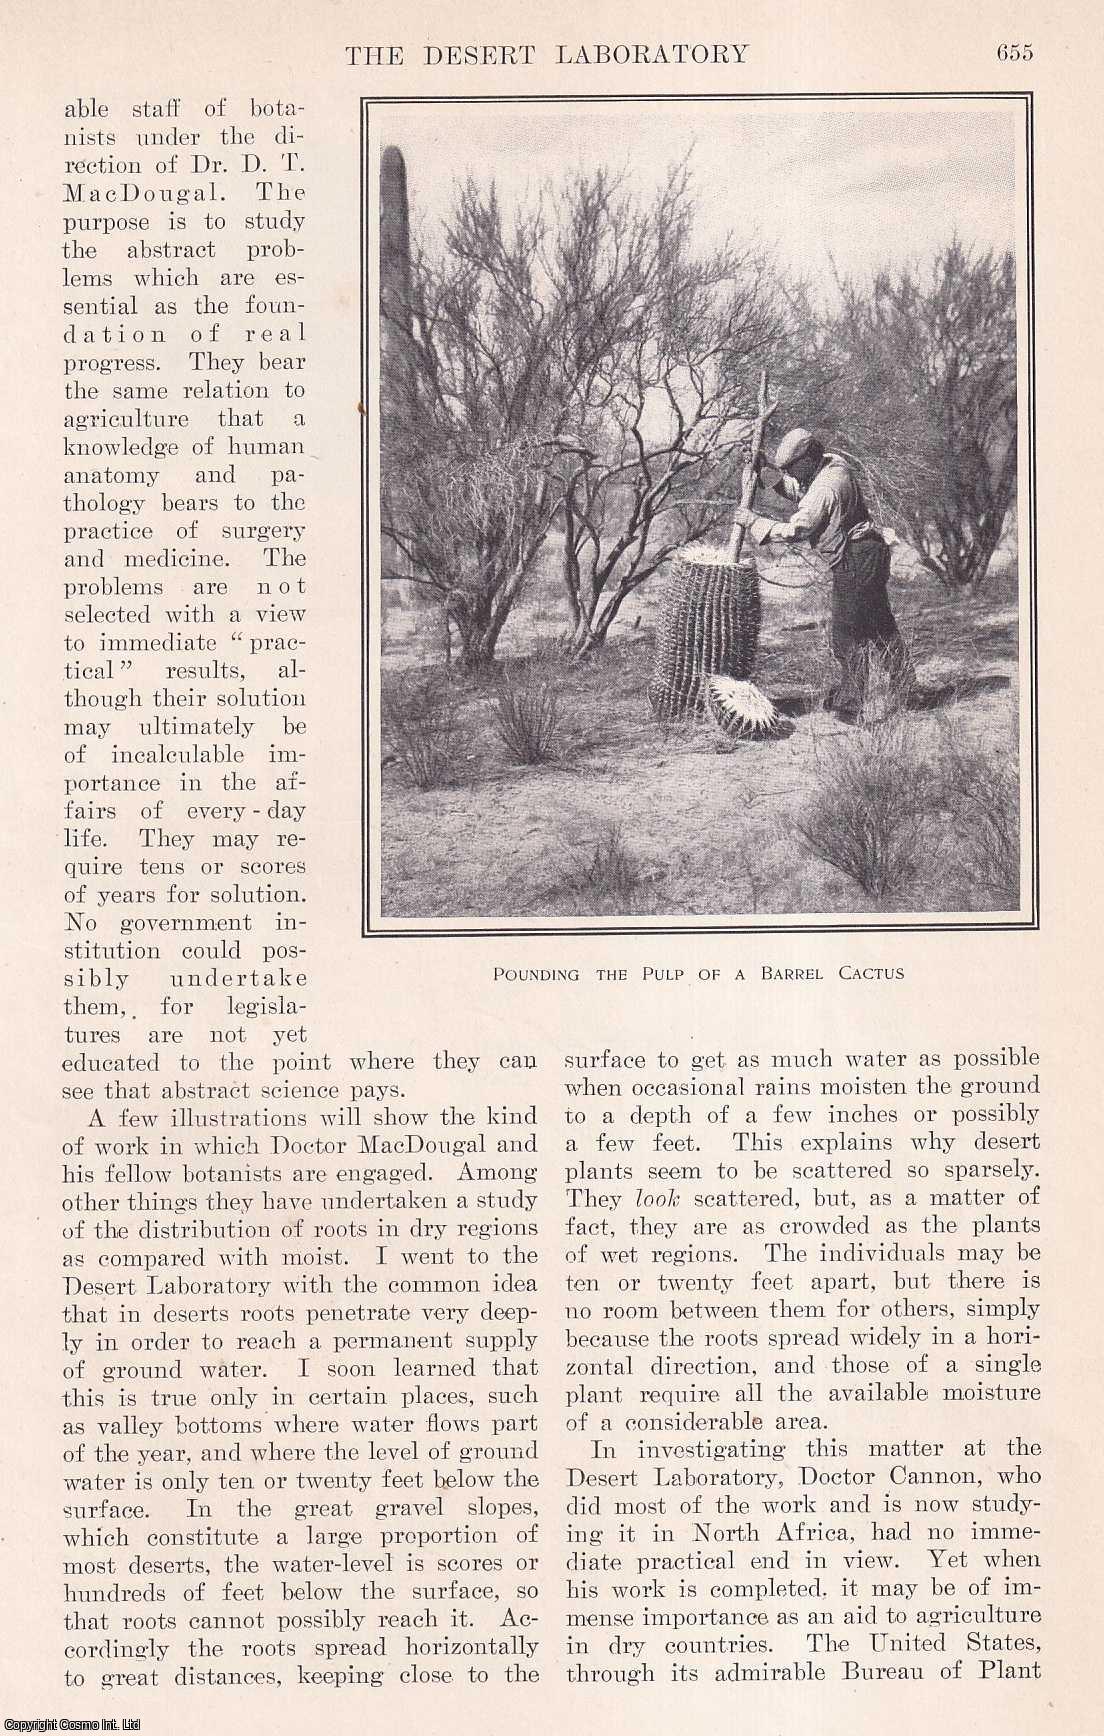 Ellsworth Huntington - Botanical Research: The Desert Laboratory of the Carnegie Institute of Washington near Tuscon, Arizona. This is an original article from the Harper's Monthly Magazine, 1911.